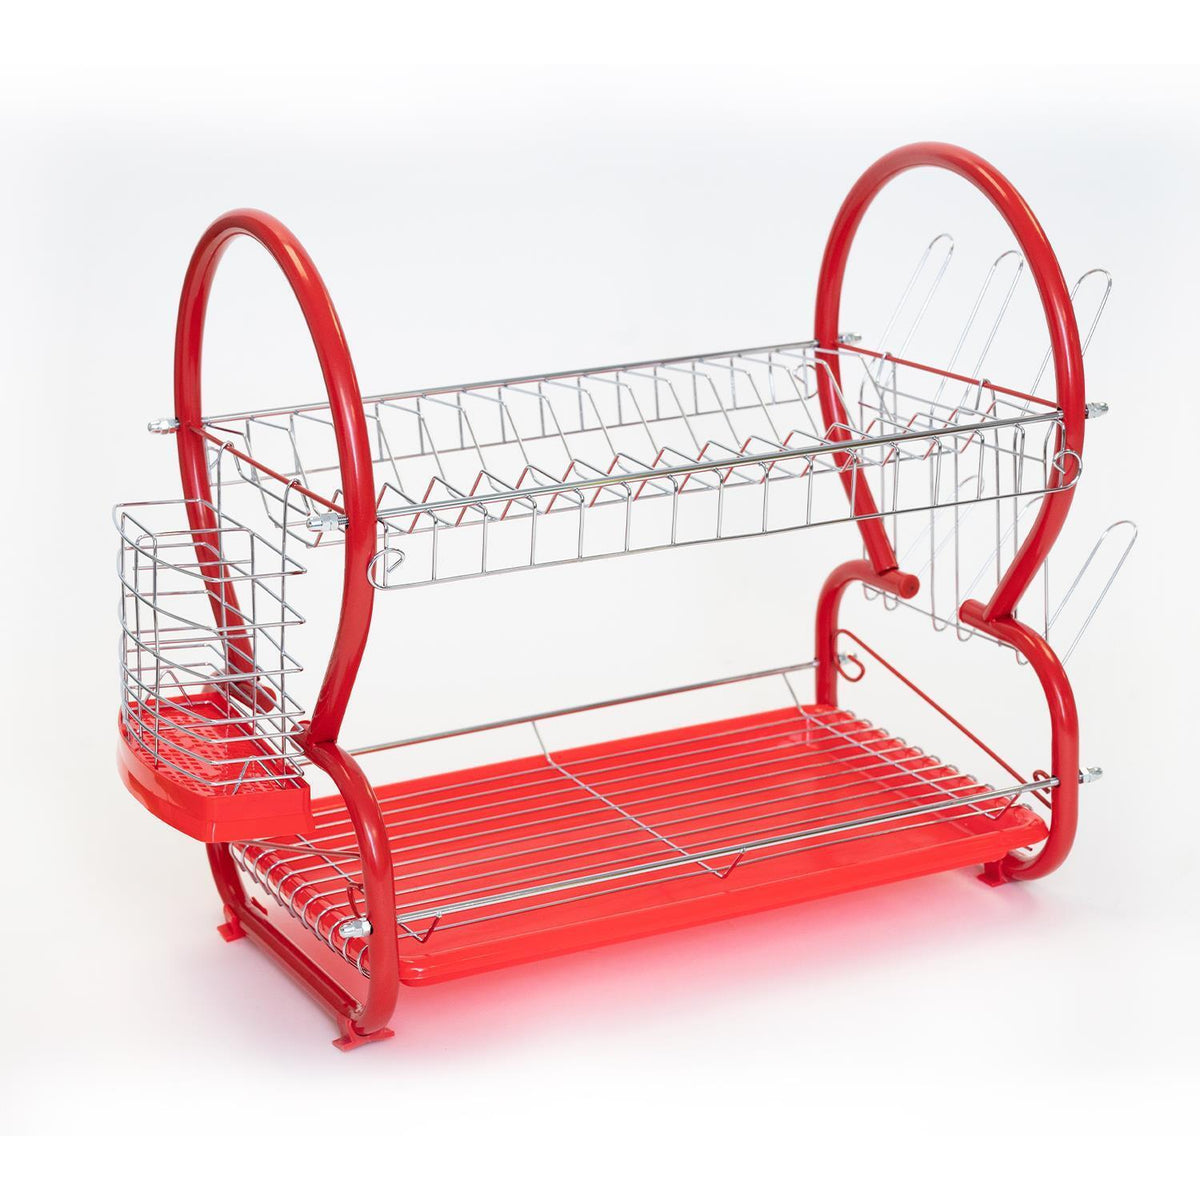 Two Tier Red Dish Draining Rack With Utensils Holder